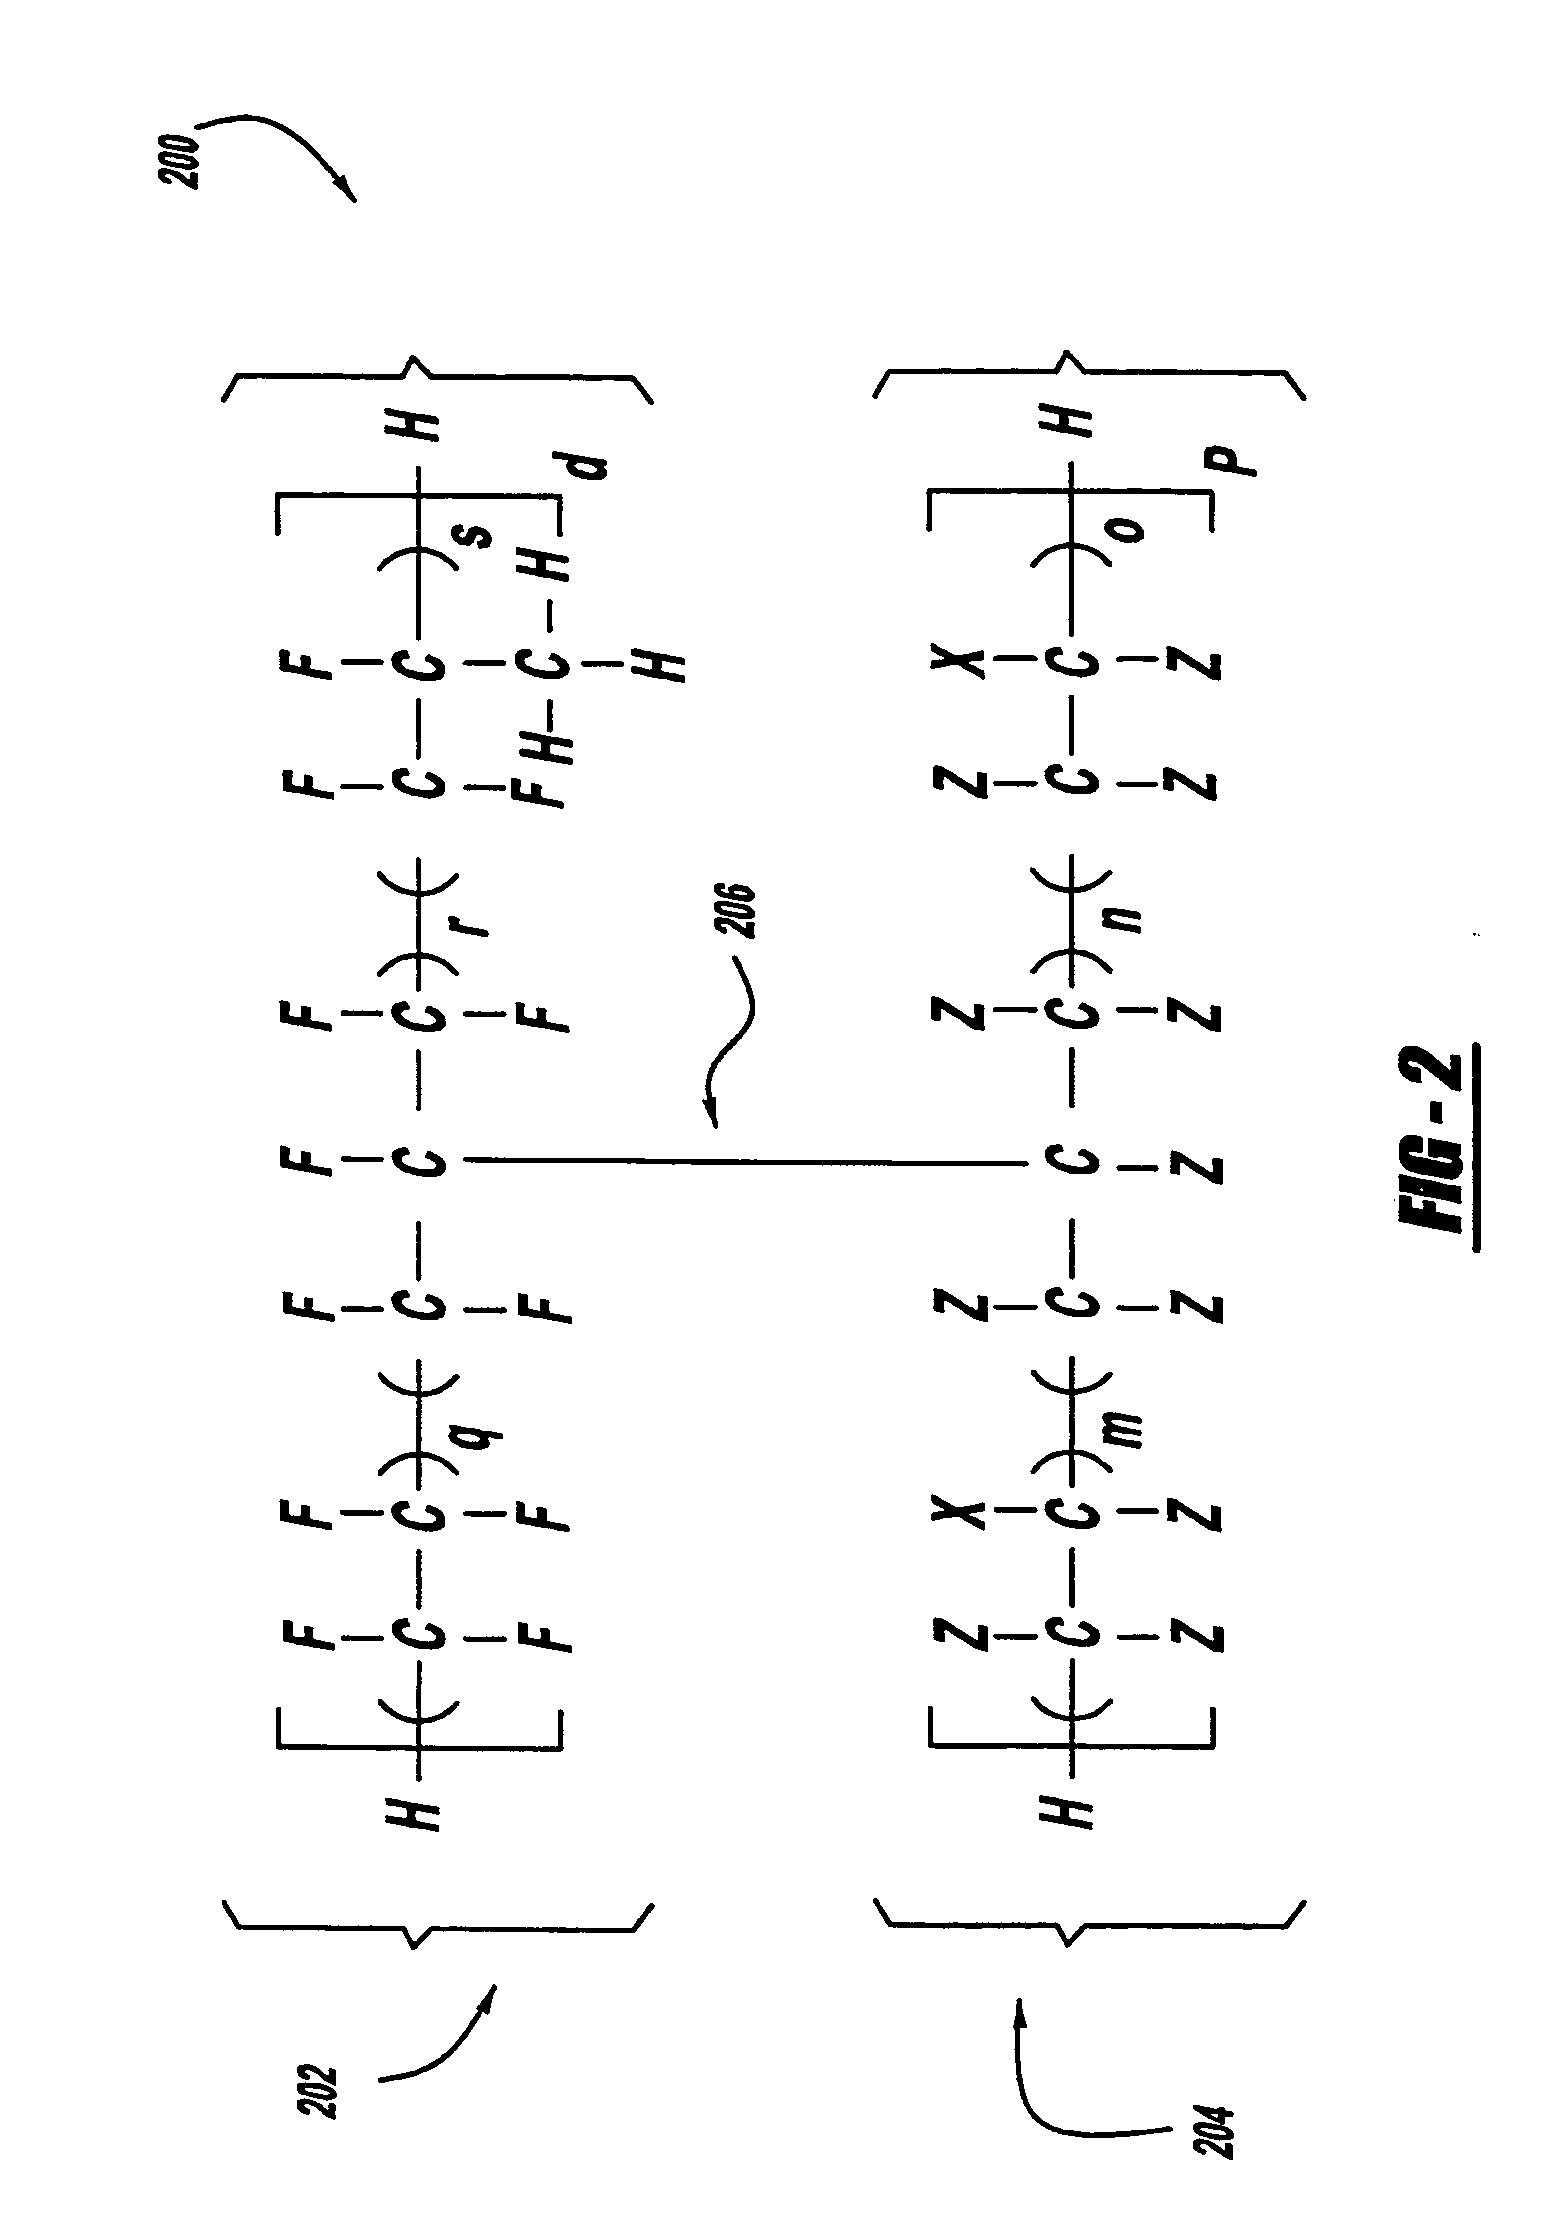 Electron beam curing in a composite having a flow resistant adhesive layer